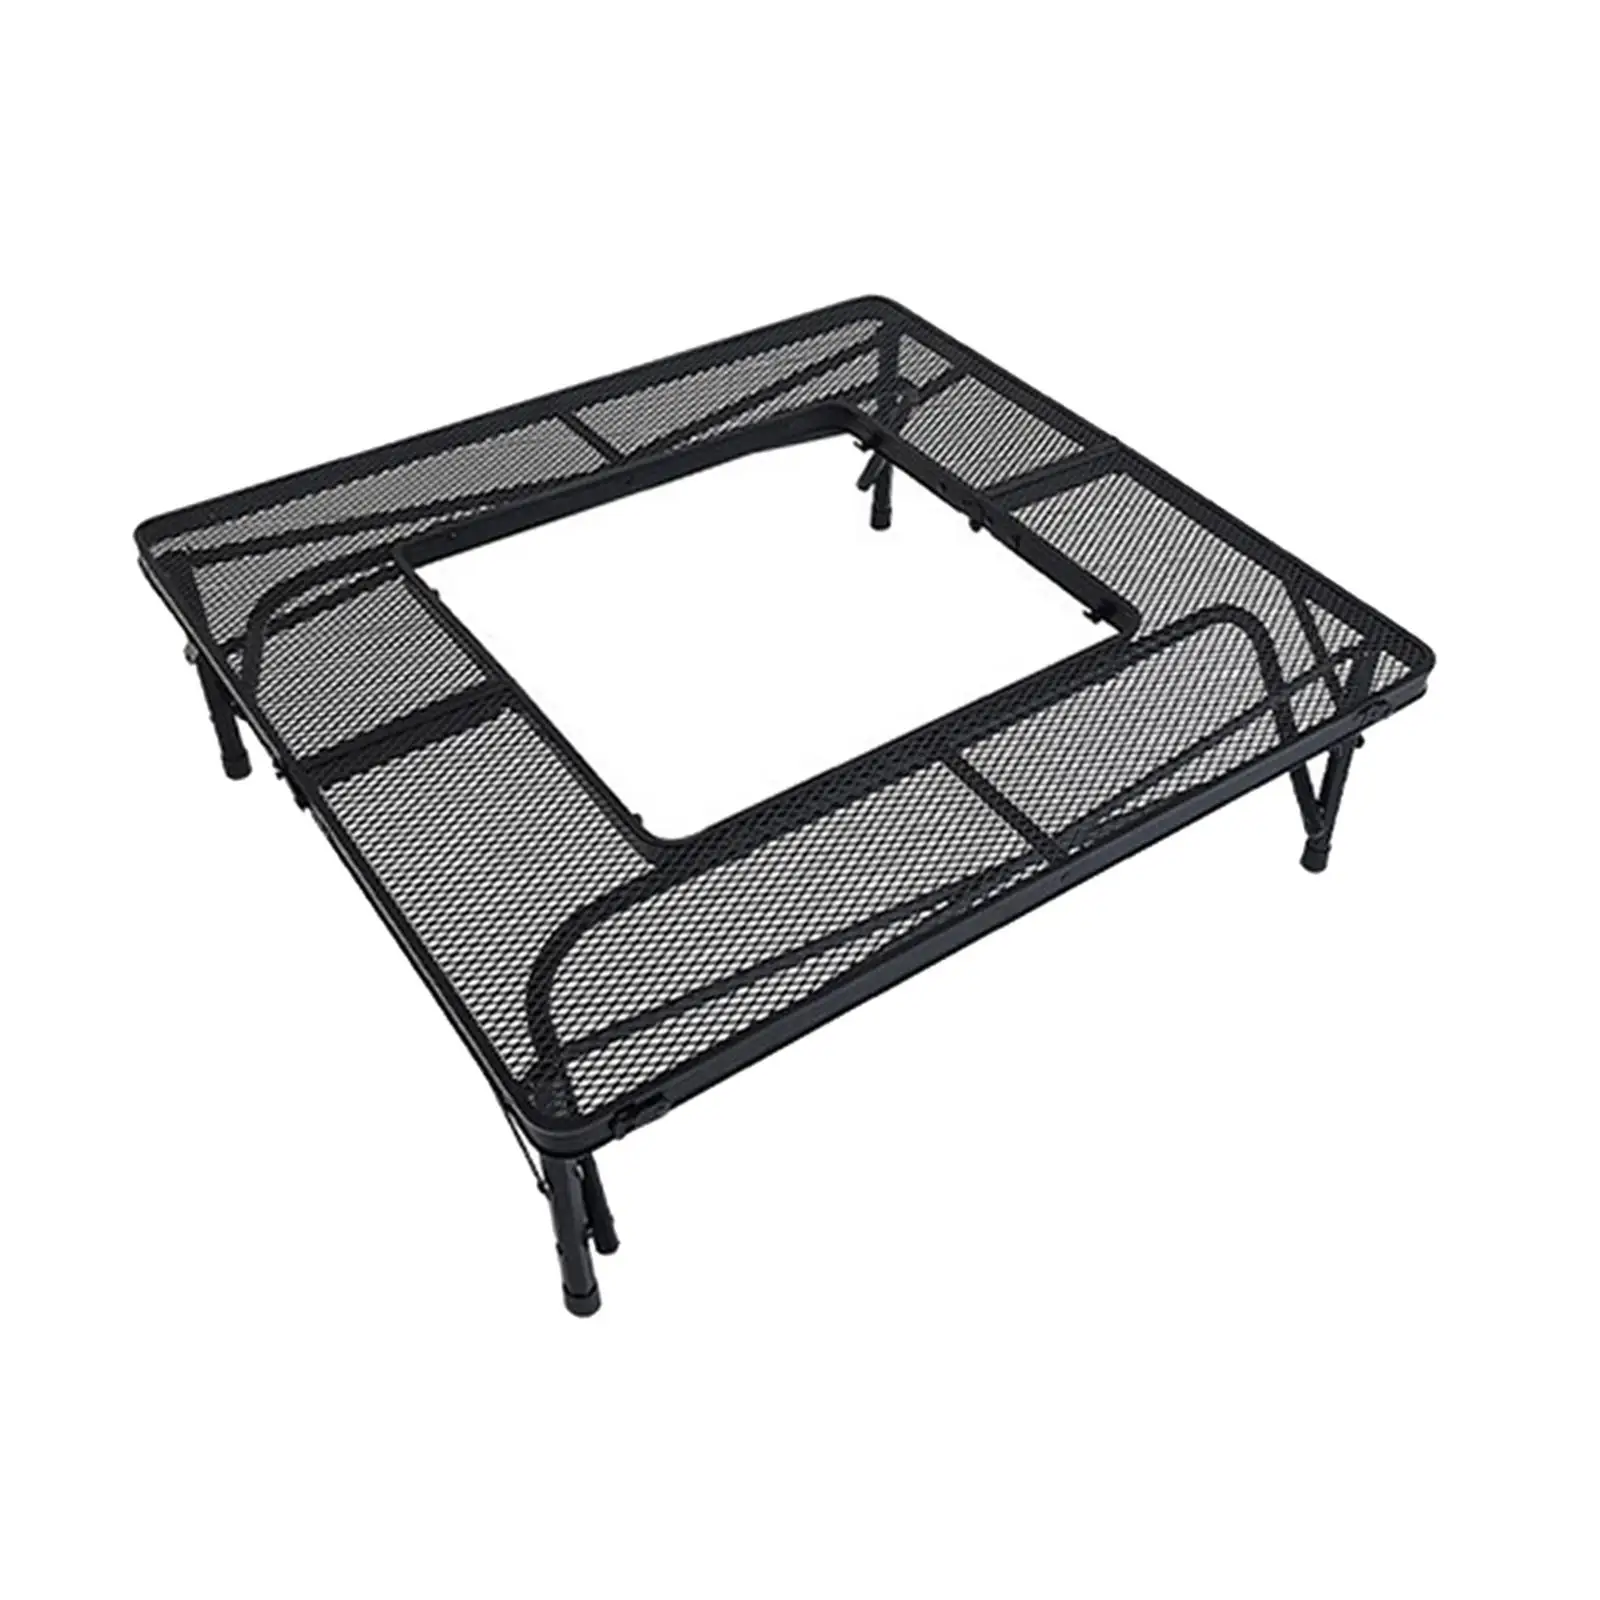 Outdoor Foldable Table Aluminium Multifunctional with A Carry Bag Camping Tables Barbecue Oven Table for Patio Backpacking Beach